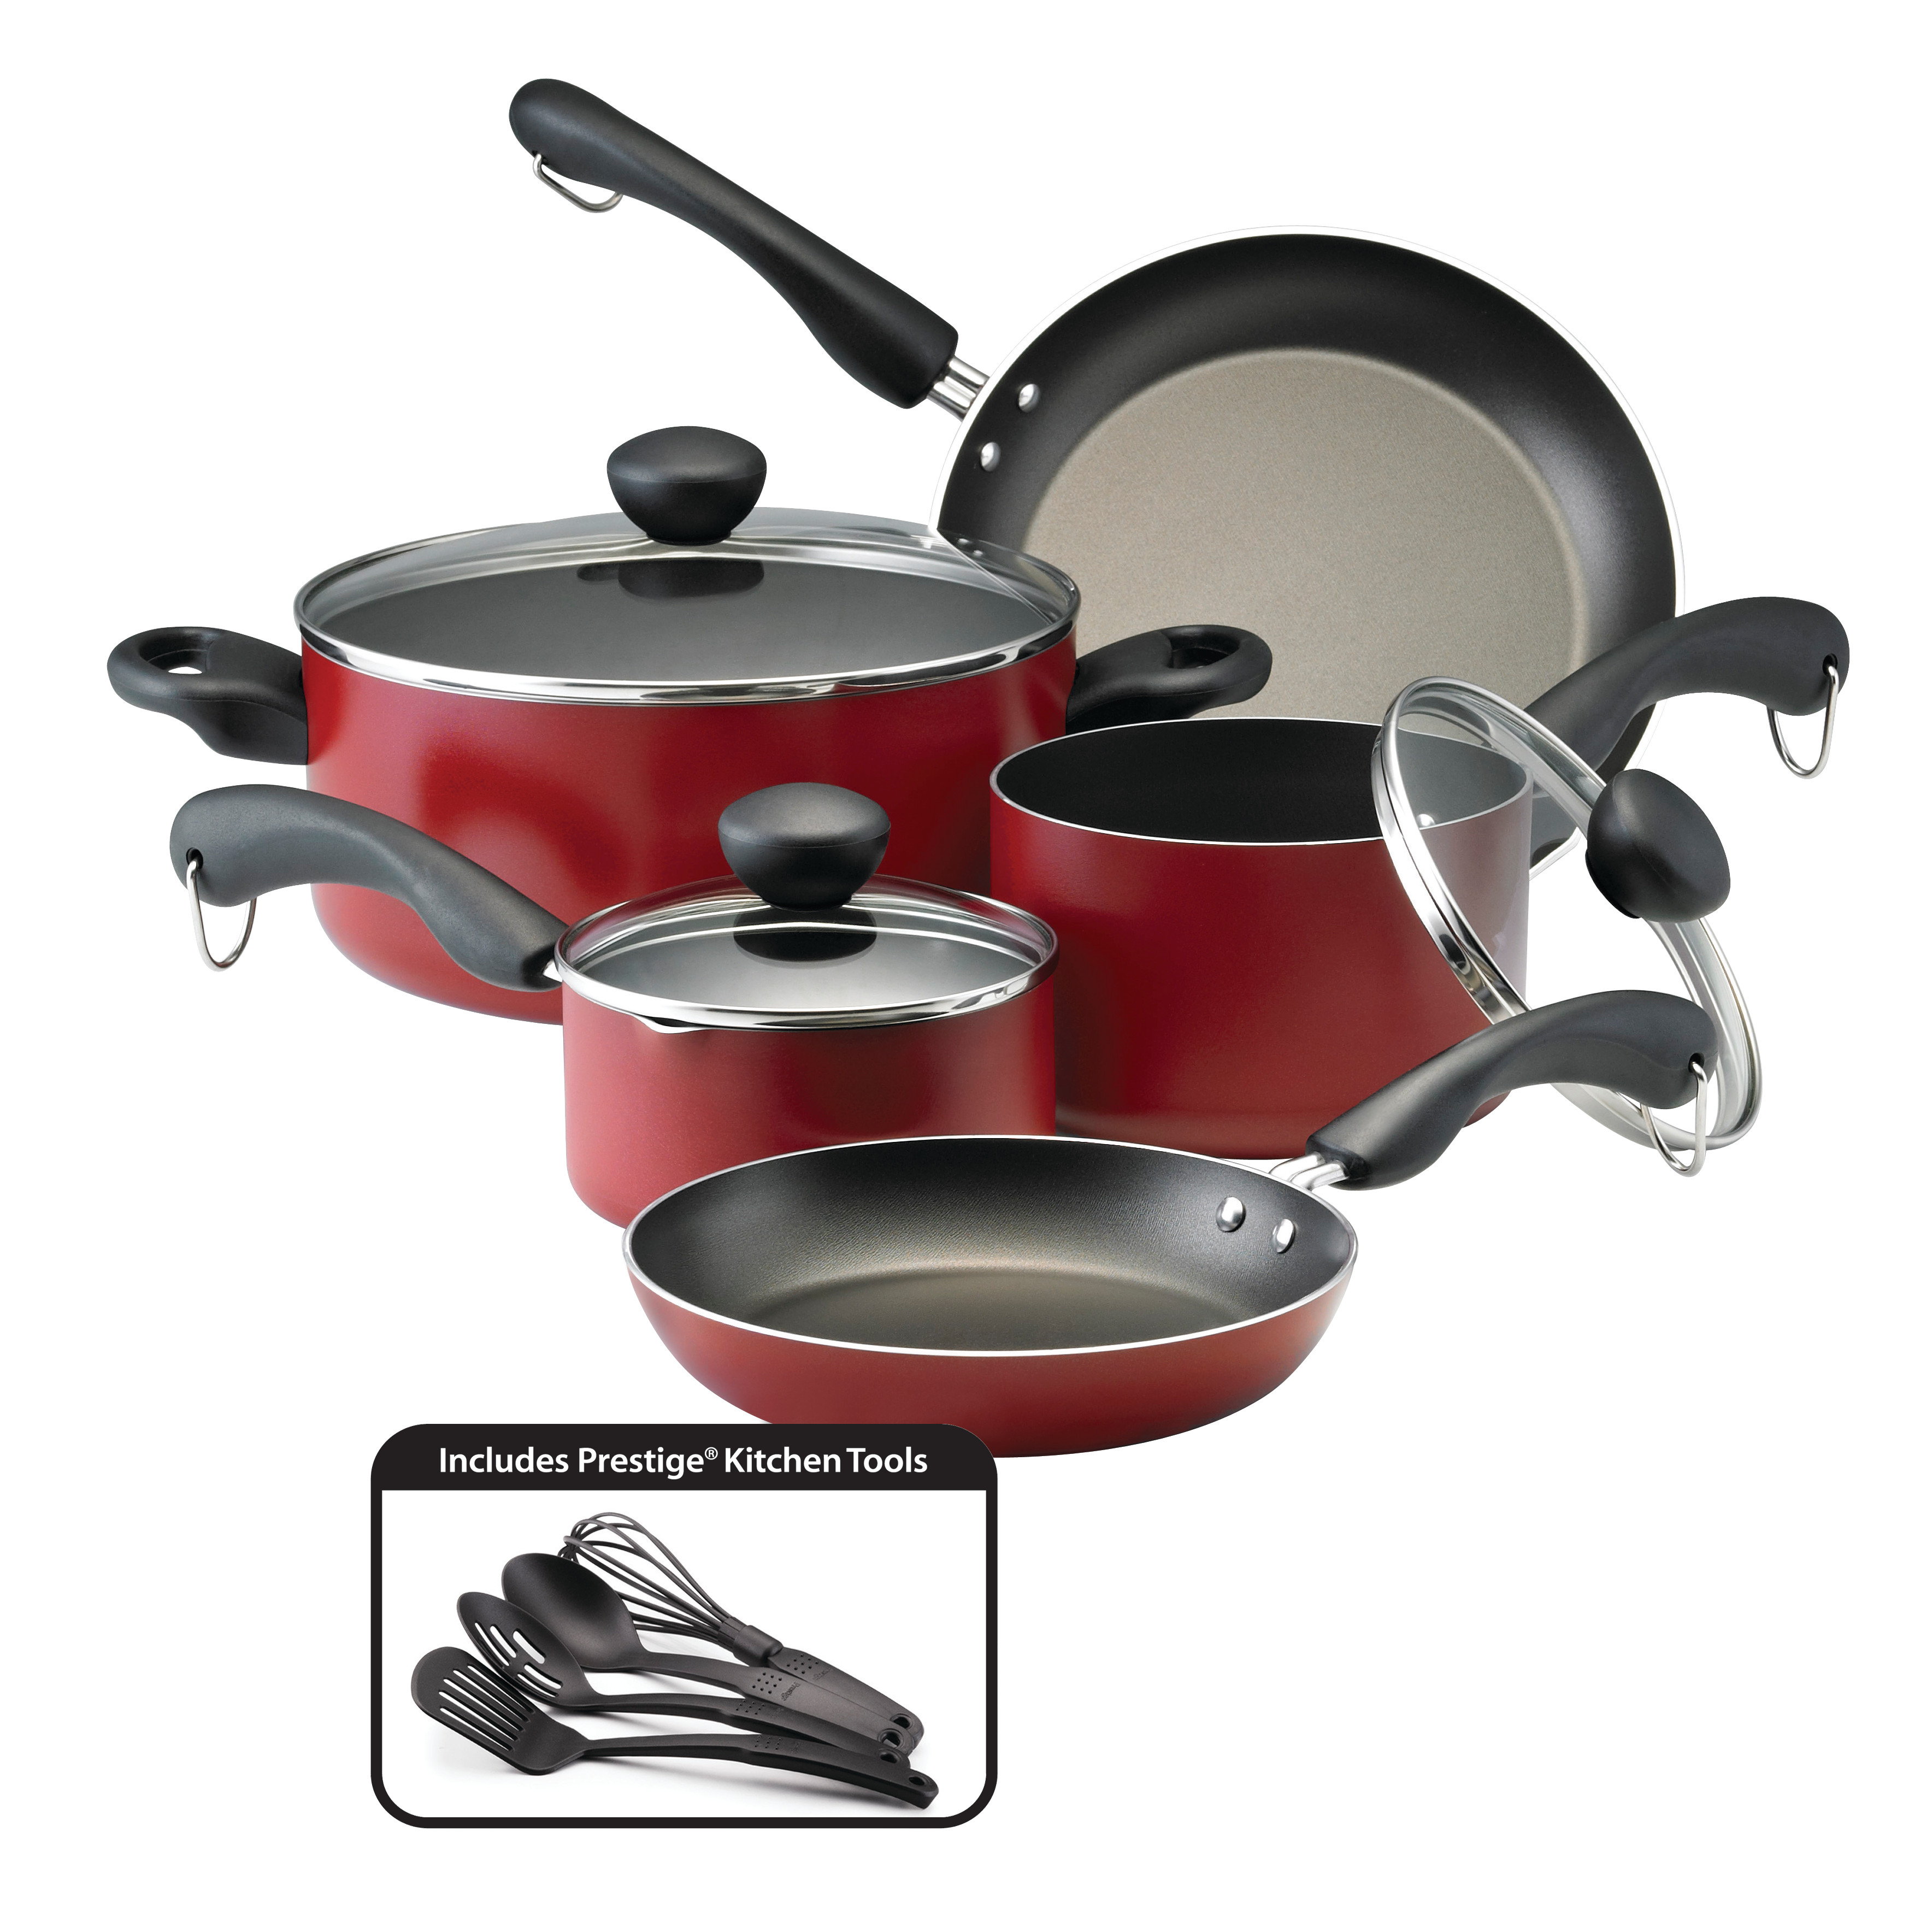 Farberware Easy Clean Dishwasher Safe Aluminum Nonstick Cookware Set, 12 Piece - image 1 of 8